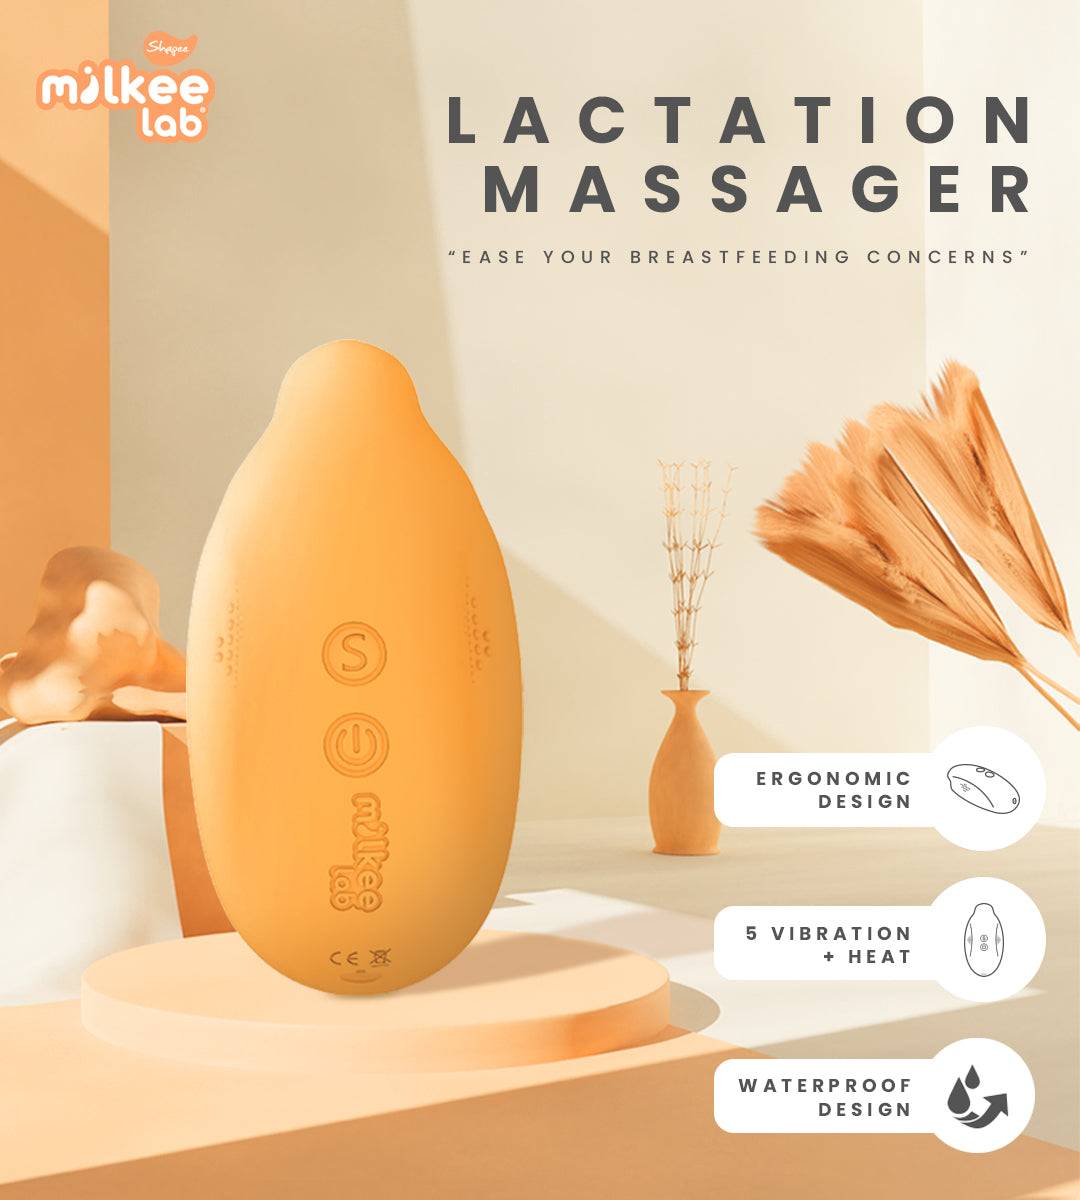 Lactation Massager by Shapee